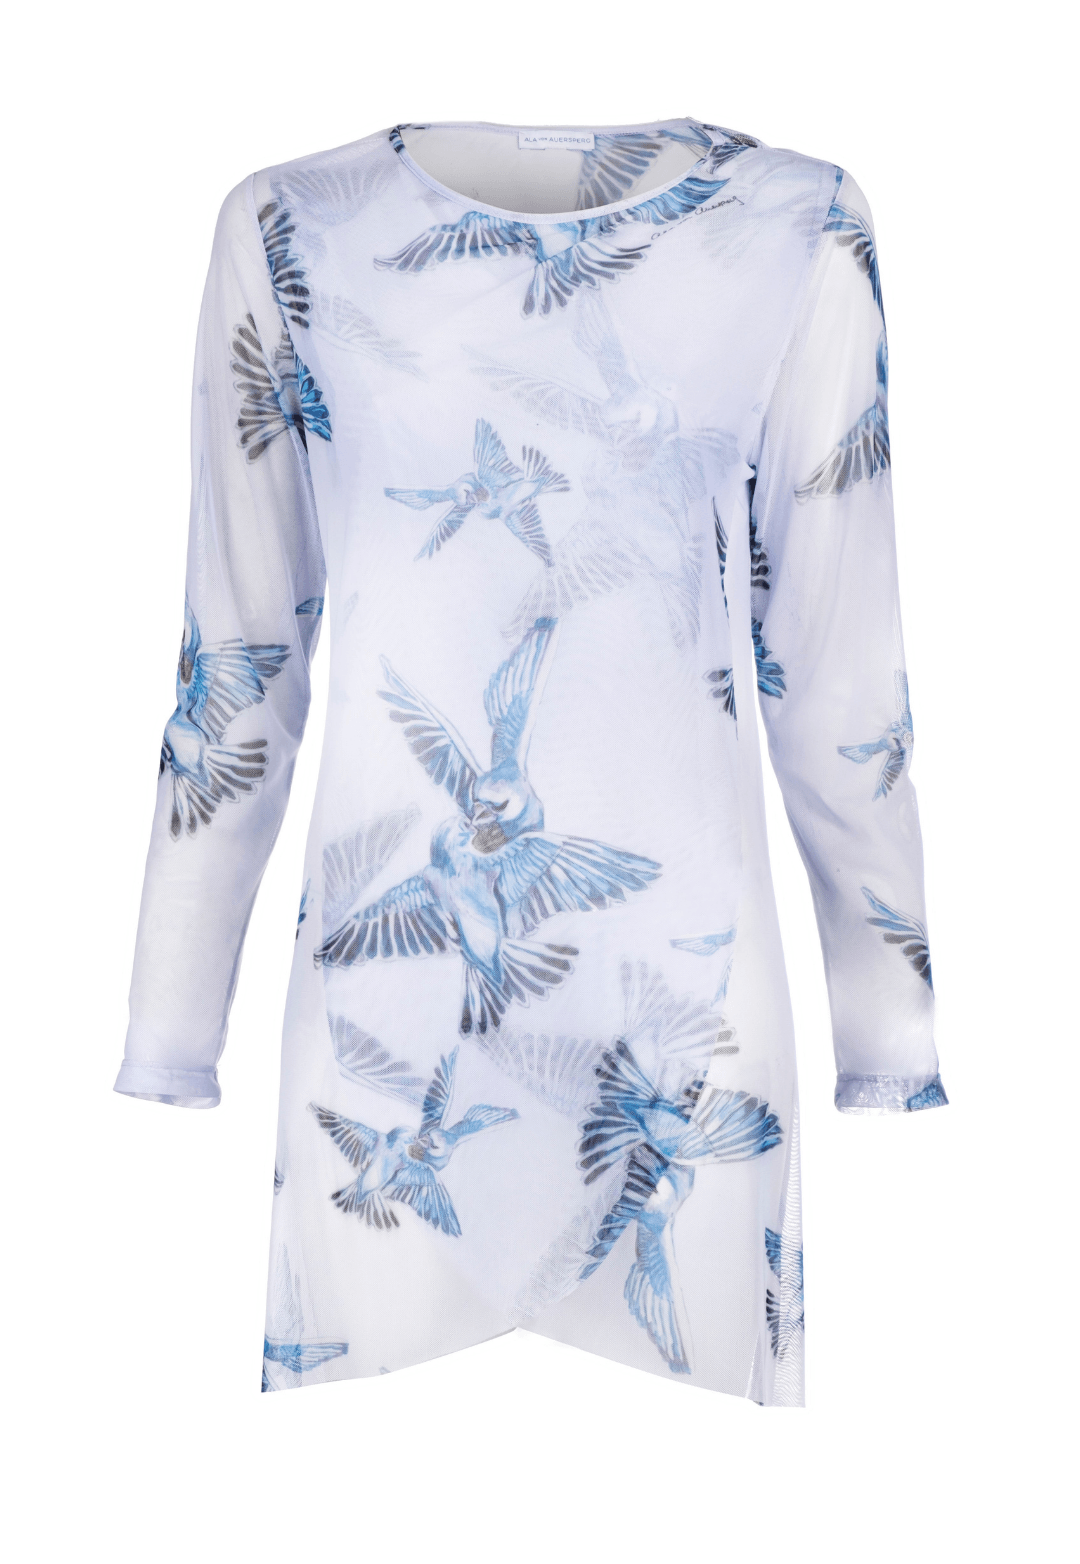 long sleeve mesh crew neck lavender top with blue birds printed on it by Ala von Auersperg